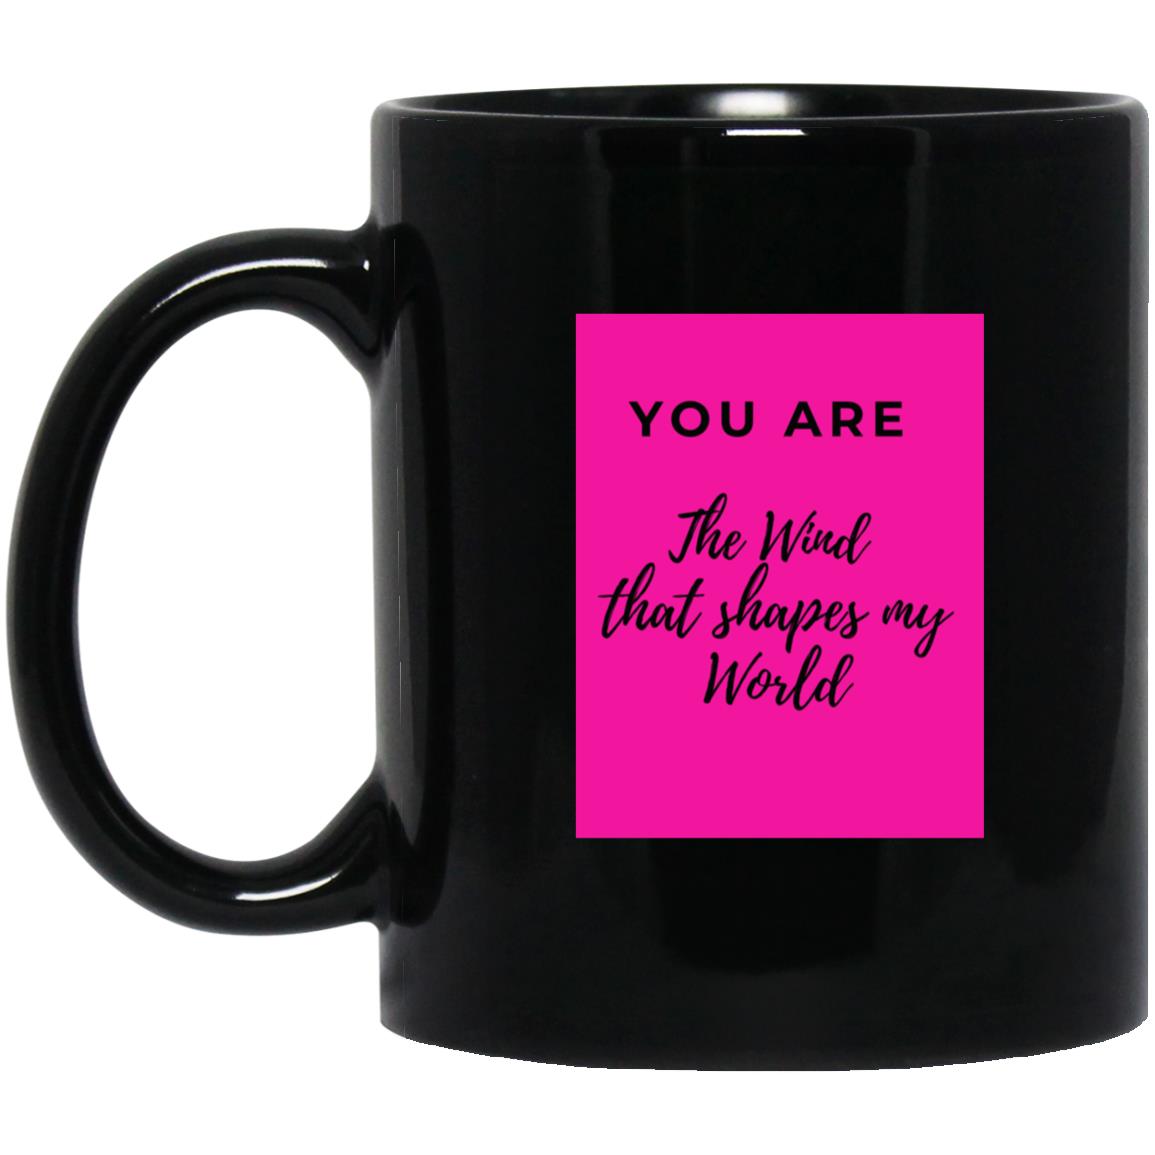 You are the Wind that shapes my world Mugs - Group 4